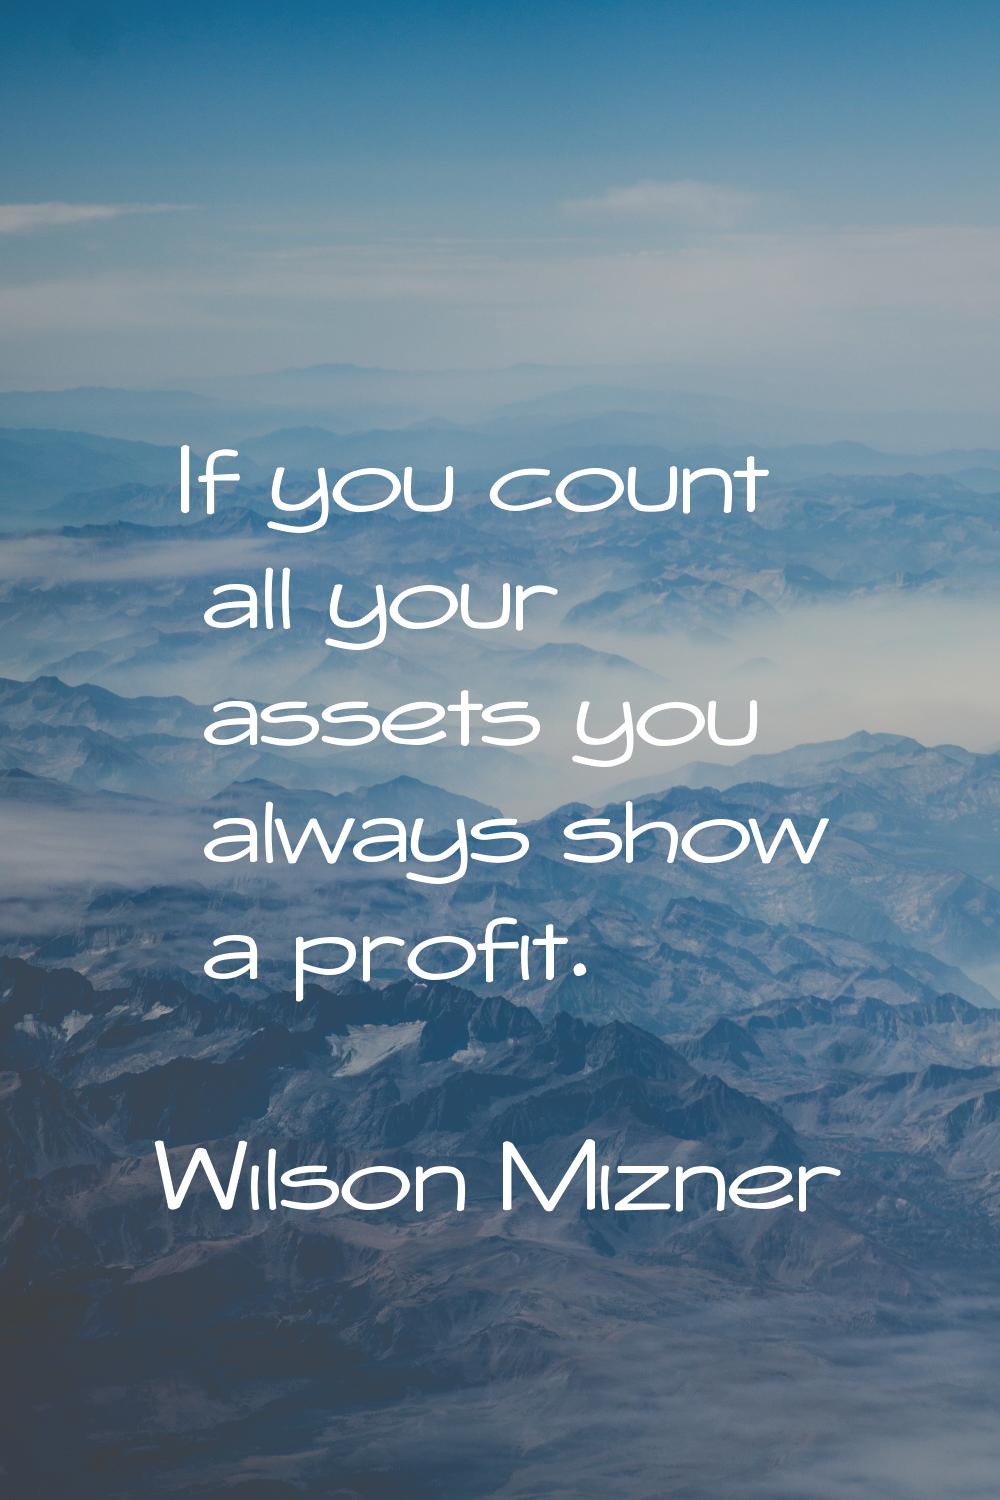 If you count all your assets you always show a profit.